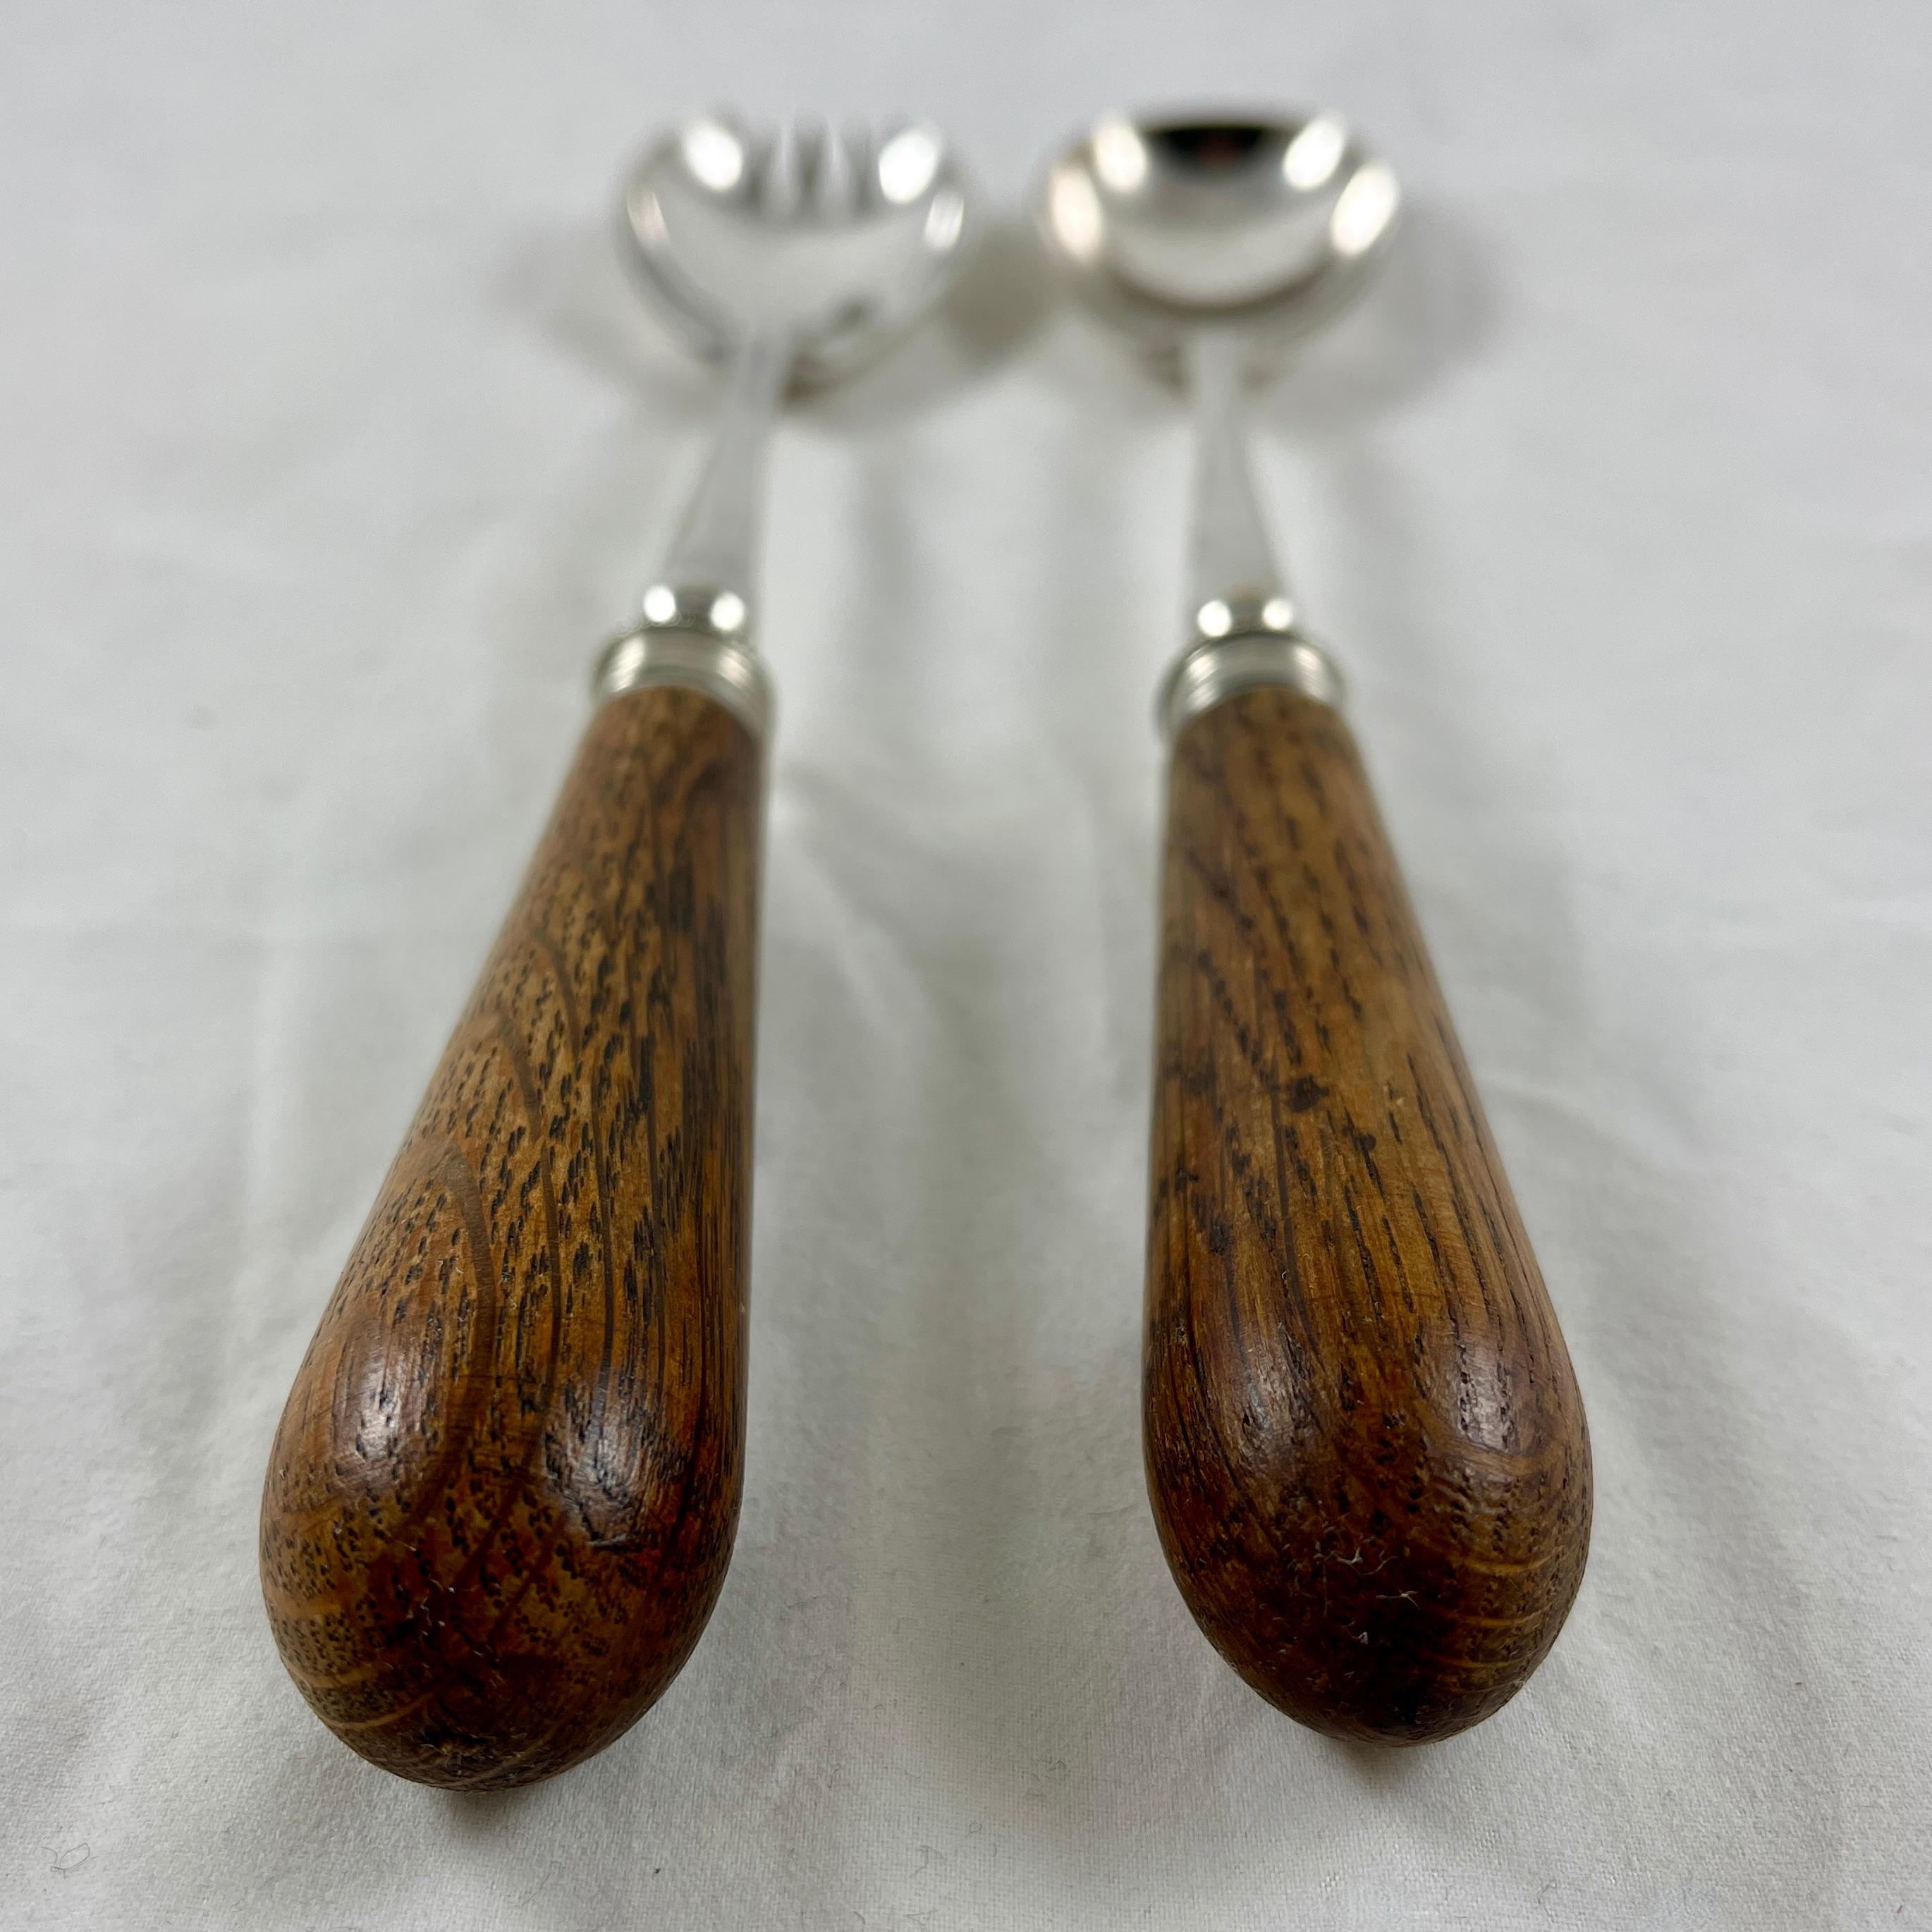 Late 19th Century English Sheffield Silver & Oak Handled Salad Fork & Spoon Serving Pair, c. 1886 For Sale